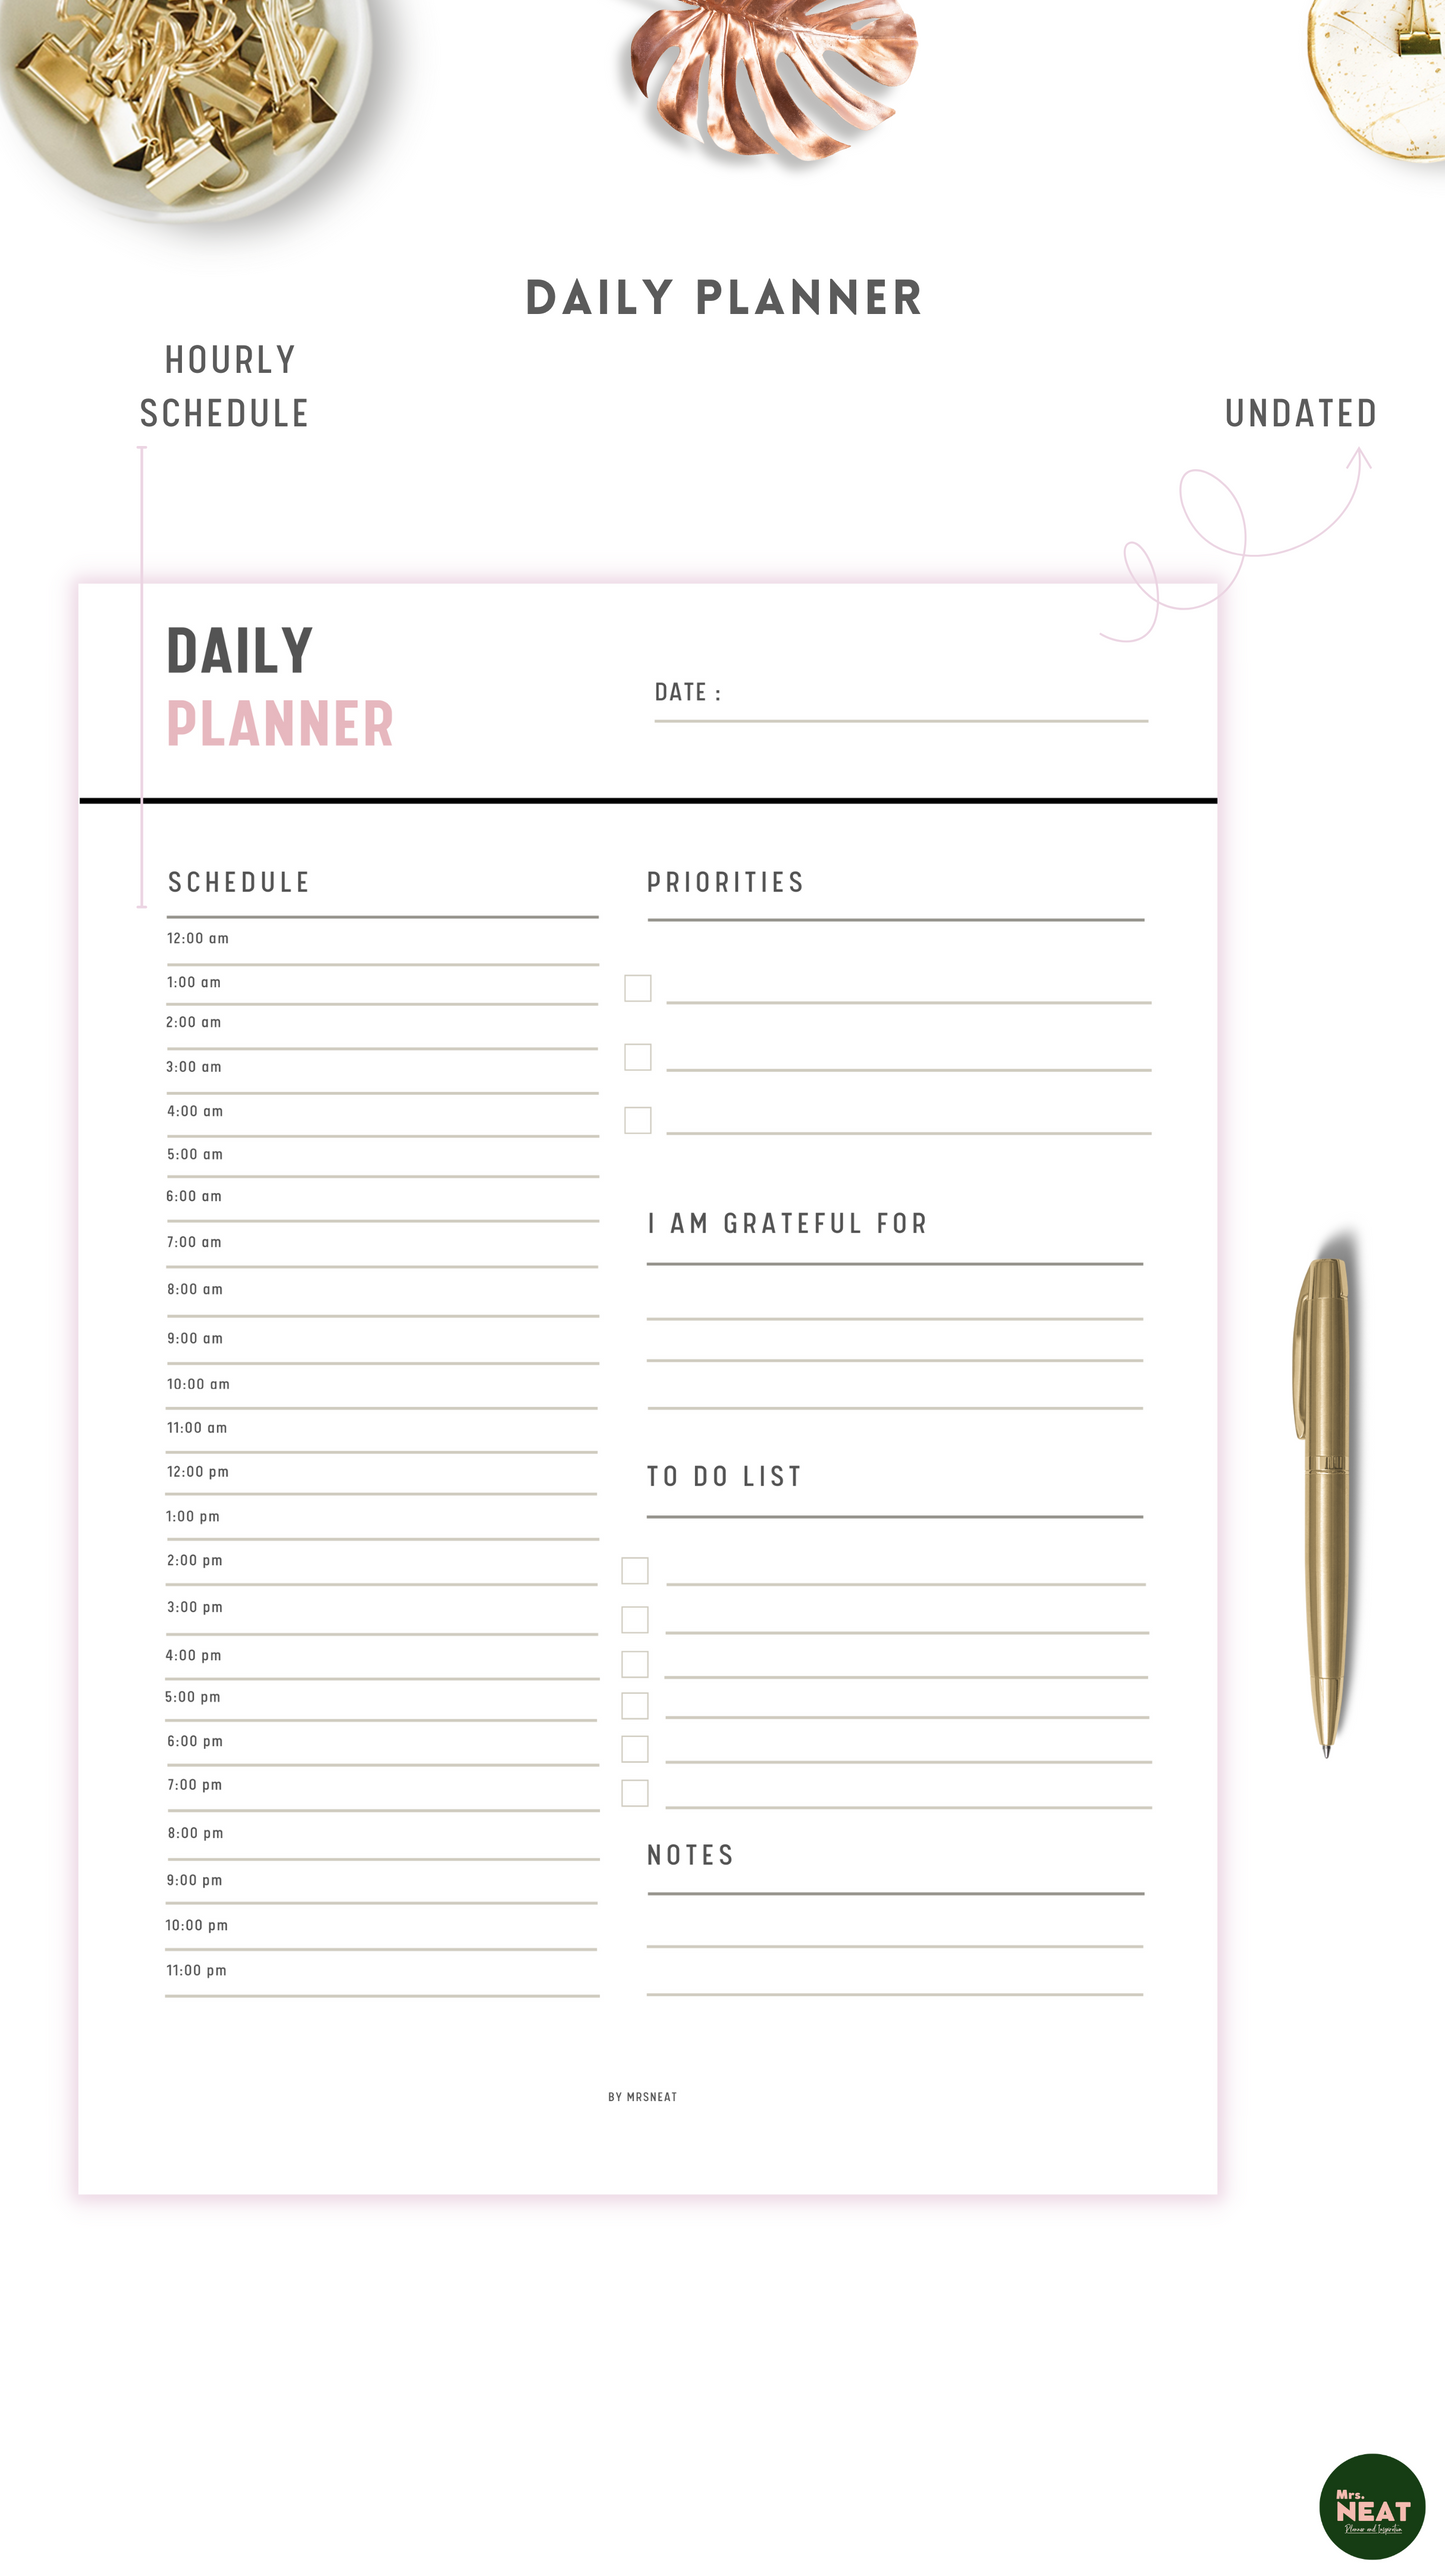 Minimalist and Clean Daily Planner with room for Hourly Schedule, Priorities, Notes, To do List and Grateful notes